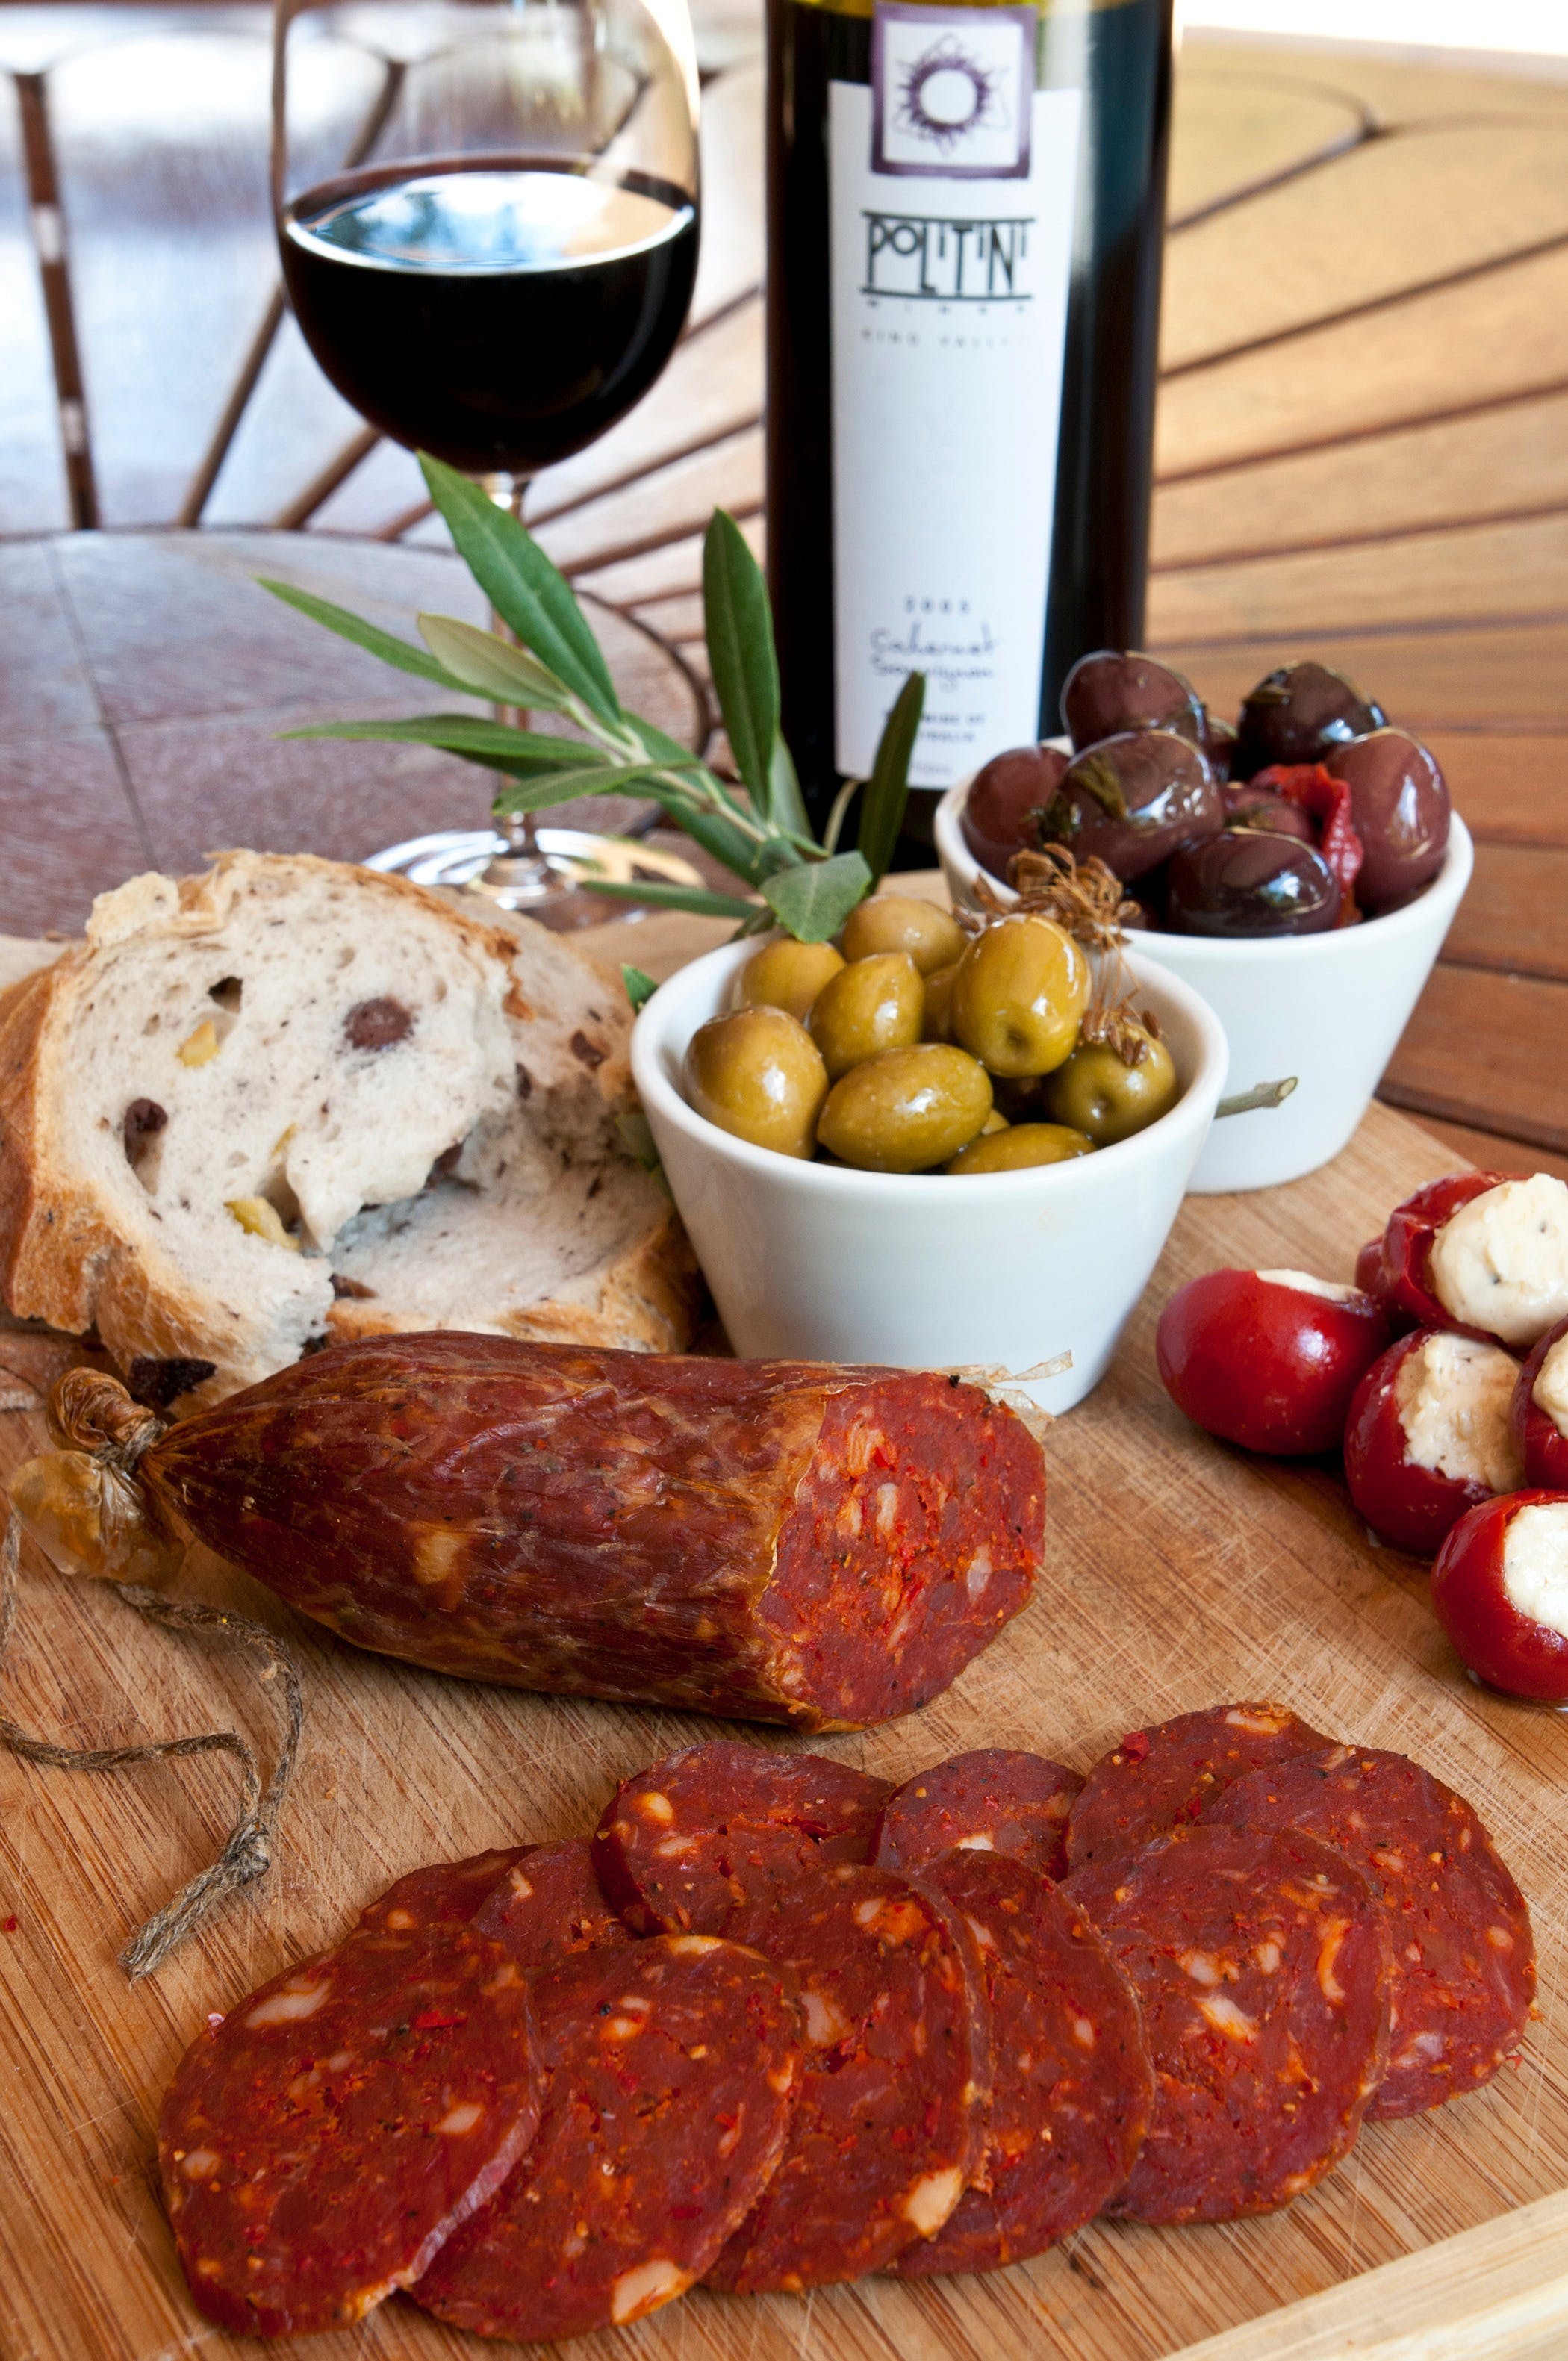 Salami and Salsicce Making classes at Politini Wines - Accommodation QLD